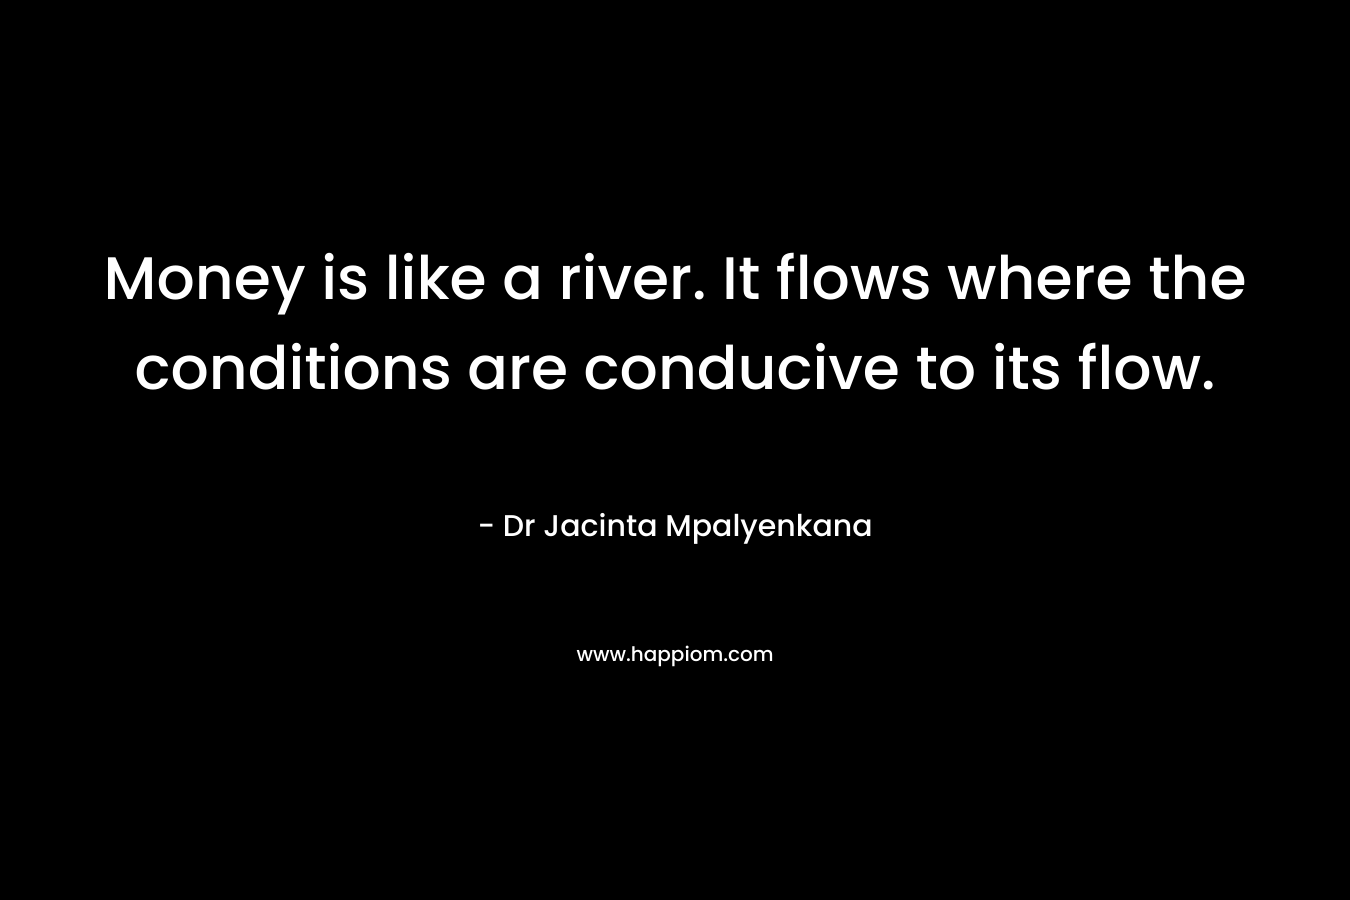 Money is like a river. It flows where the conditions are conducive to its flow.